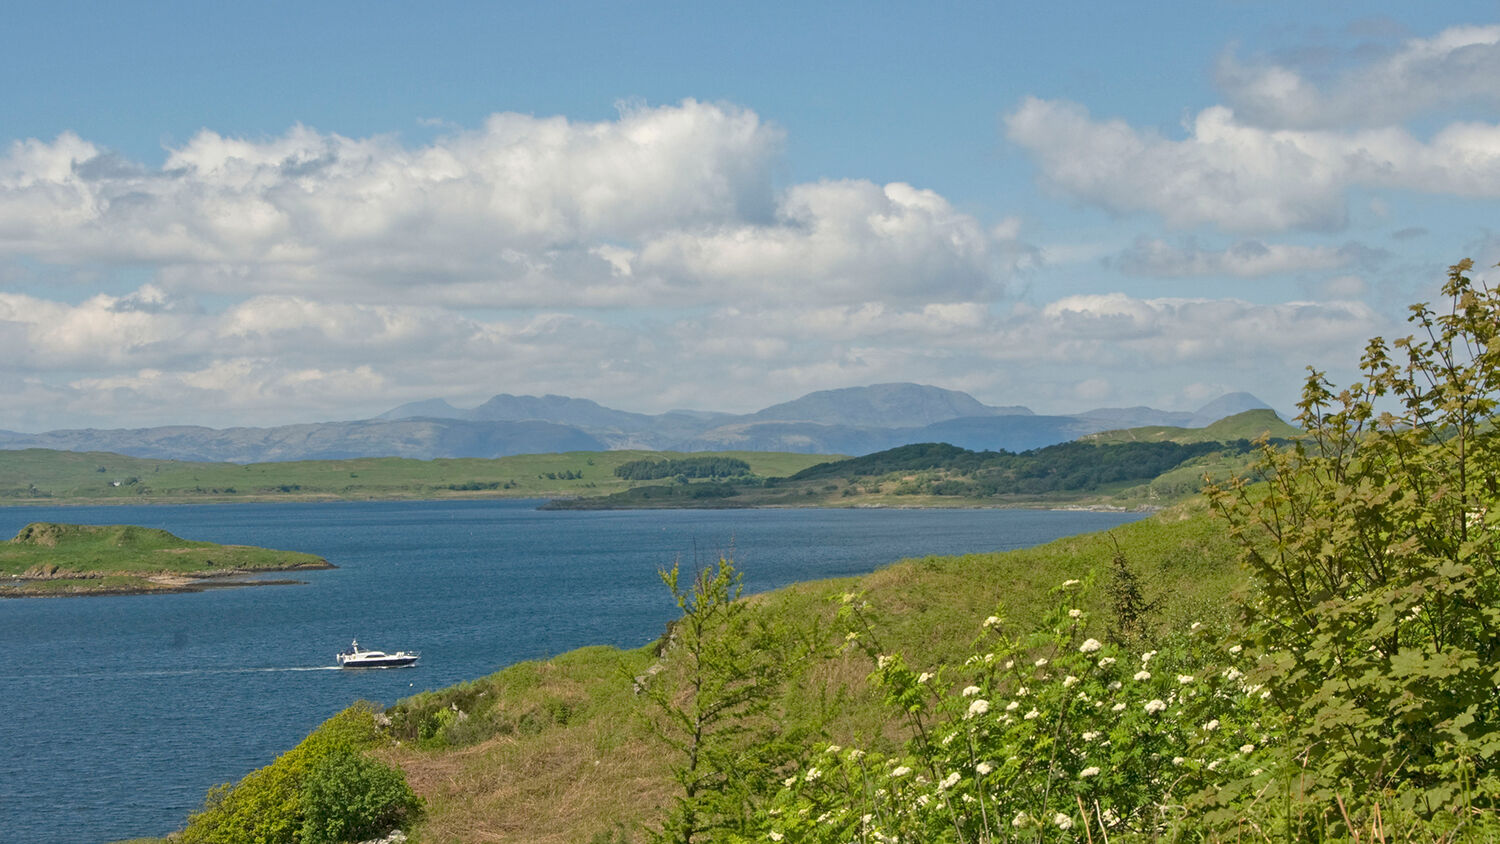 A sunny view over the Sound of Jura from Arduaine Garden